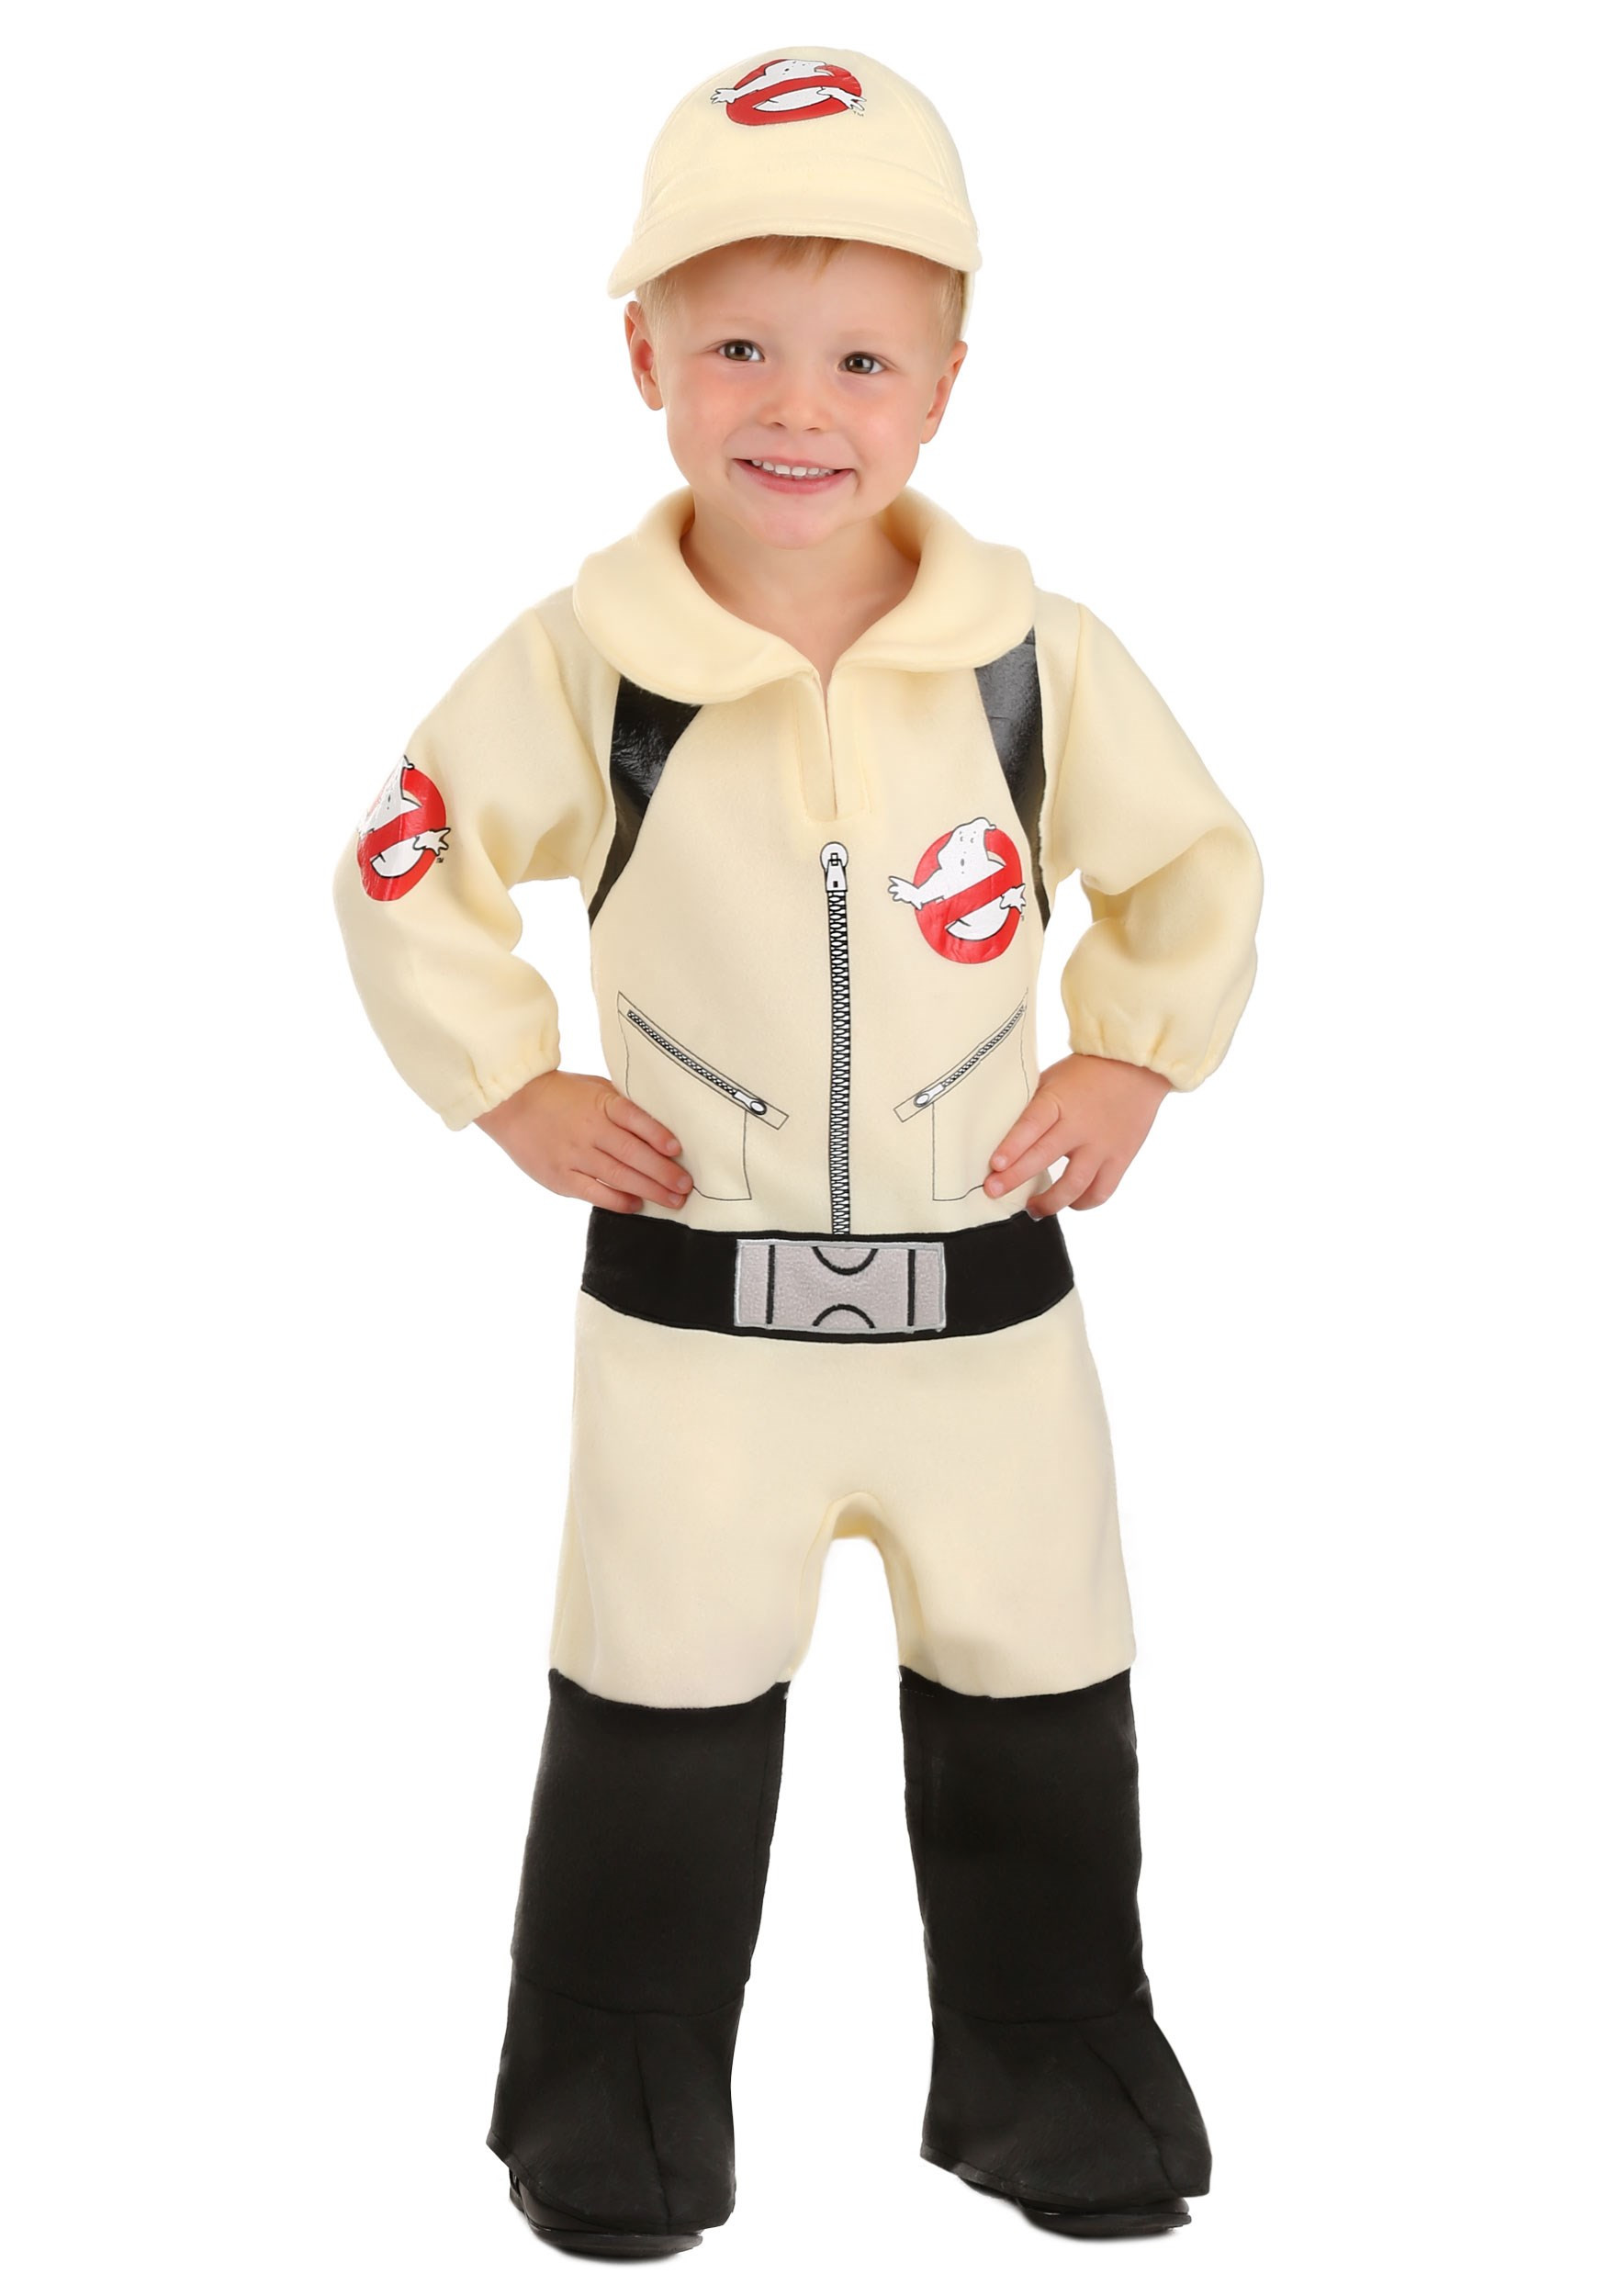 DIY Toddler Ghostbuster Costume
 Ghostbusters Baby Toddler Costume Funny Halloween